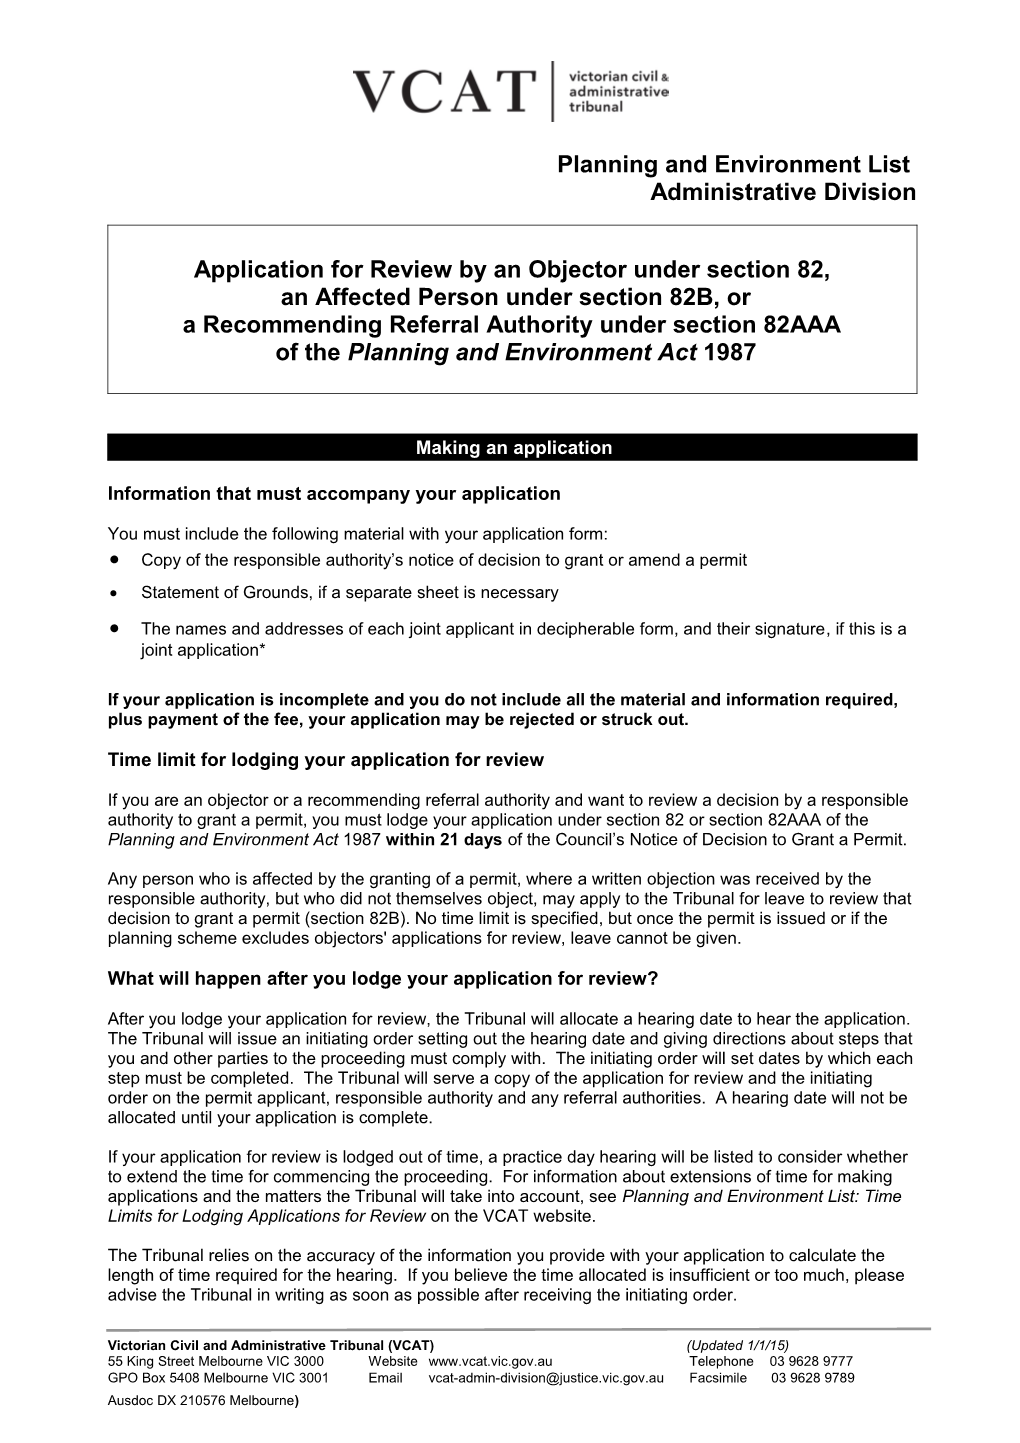 Application for Review by an Objector Under Section 82